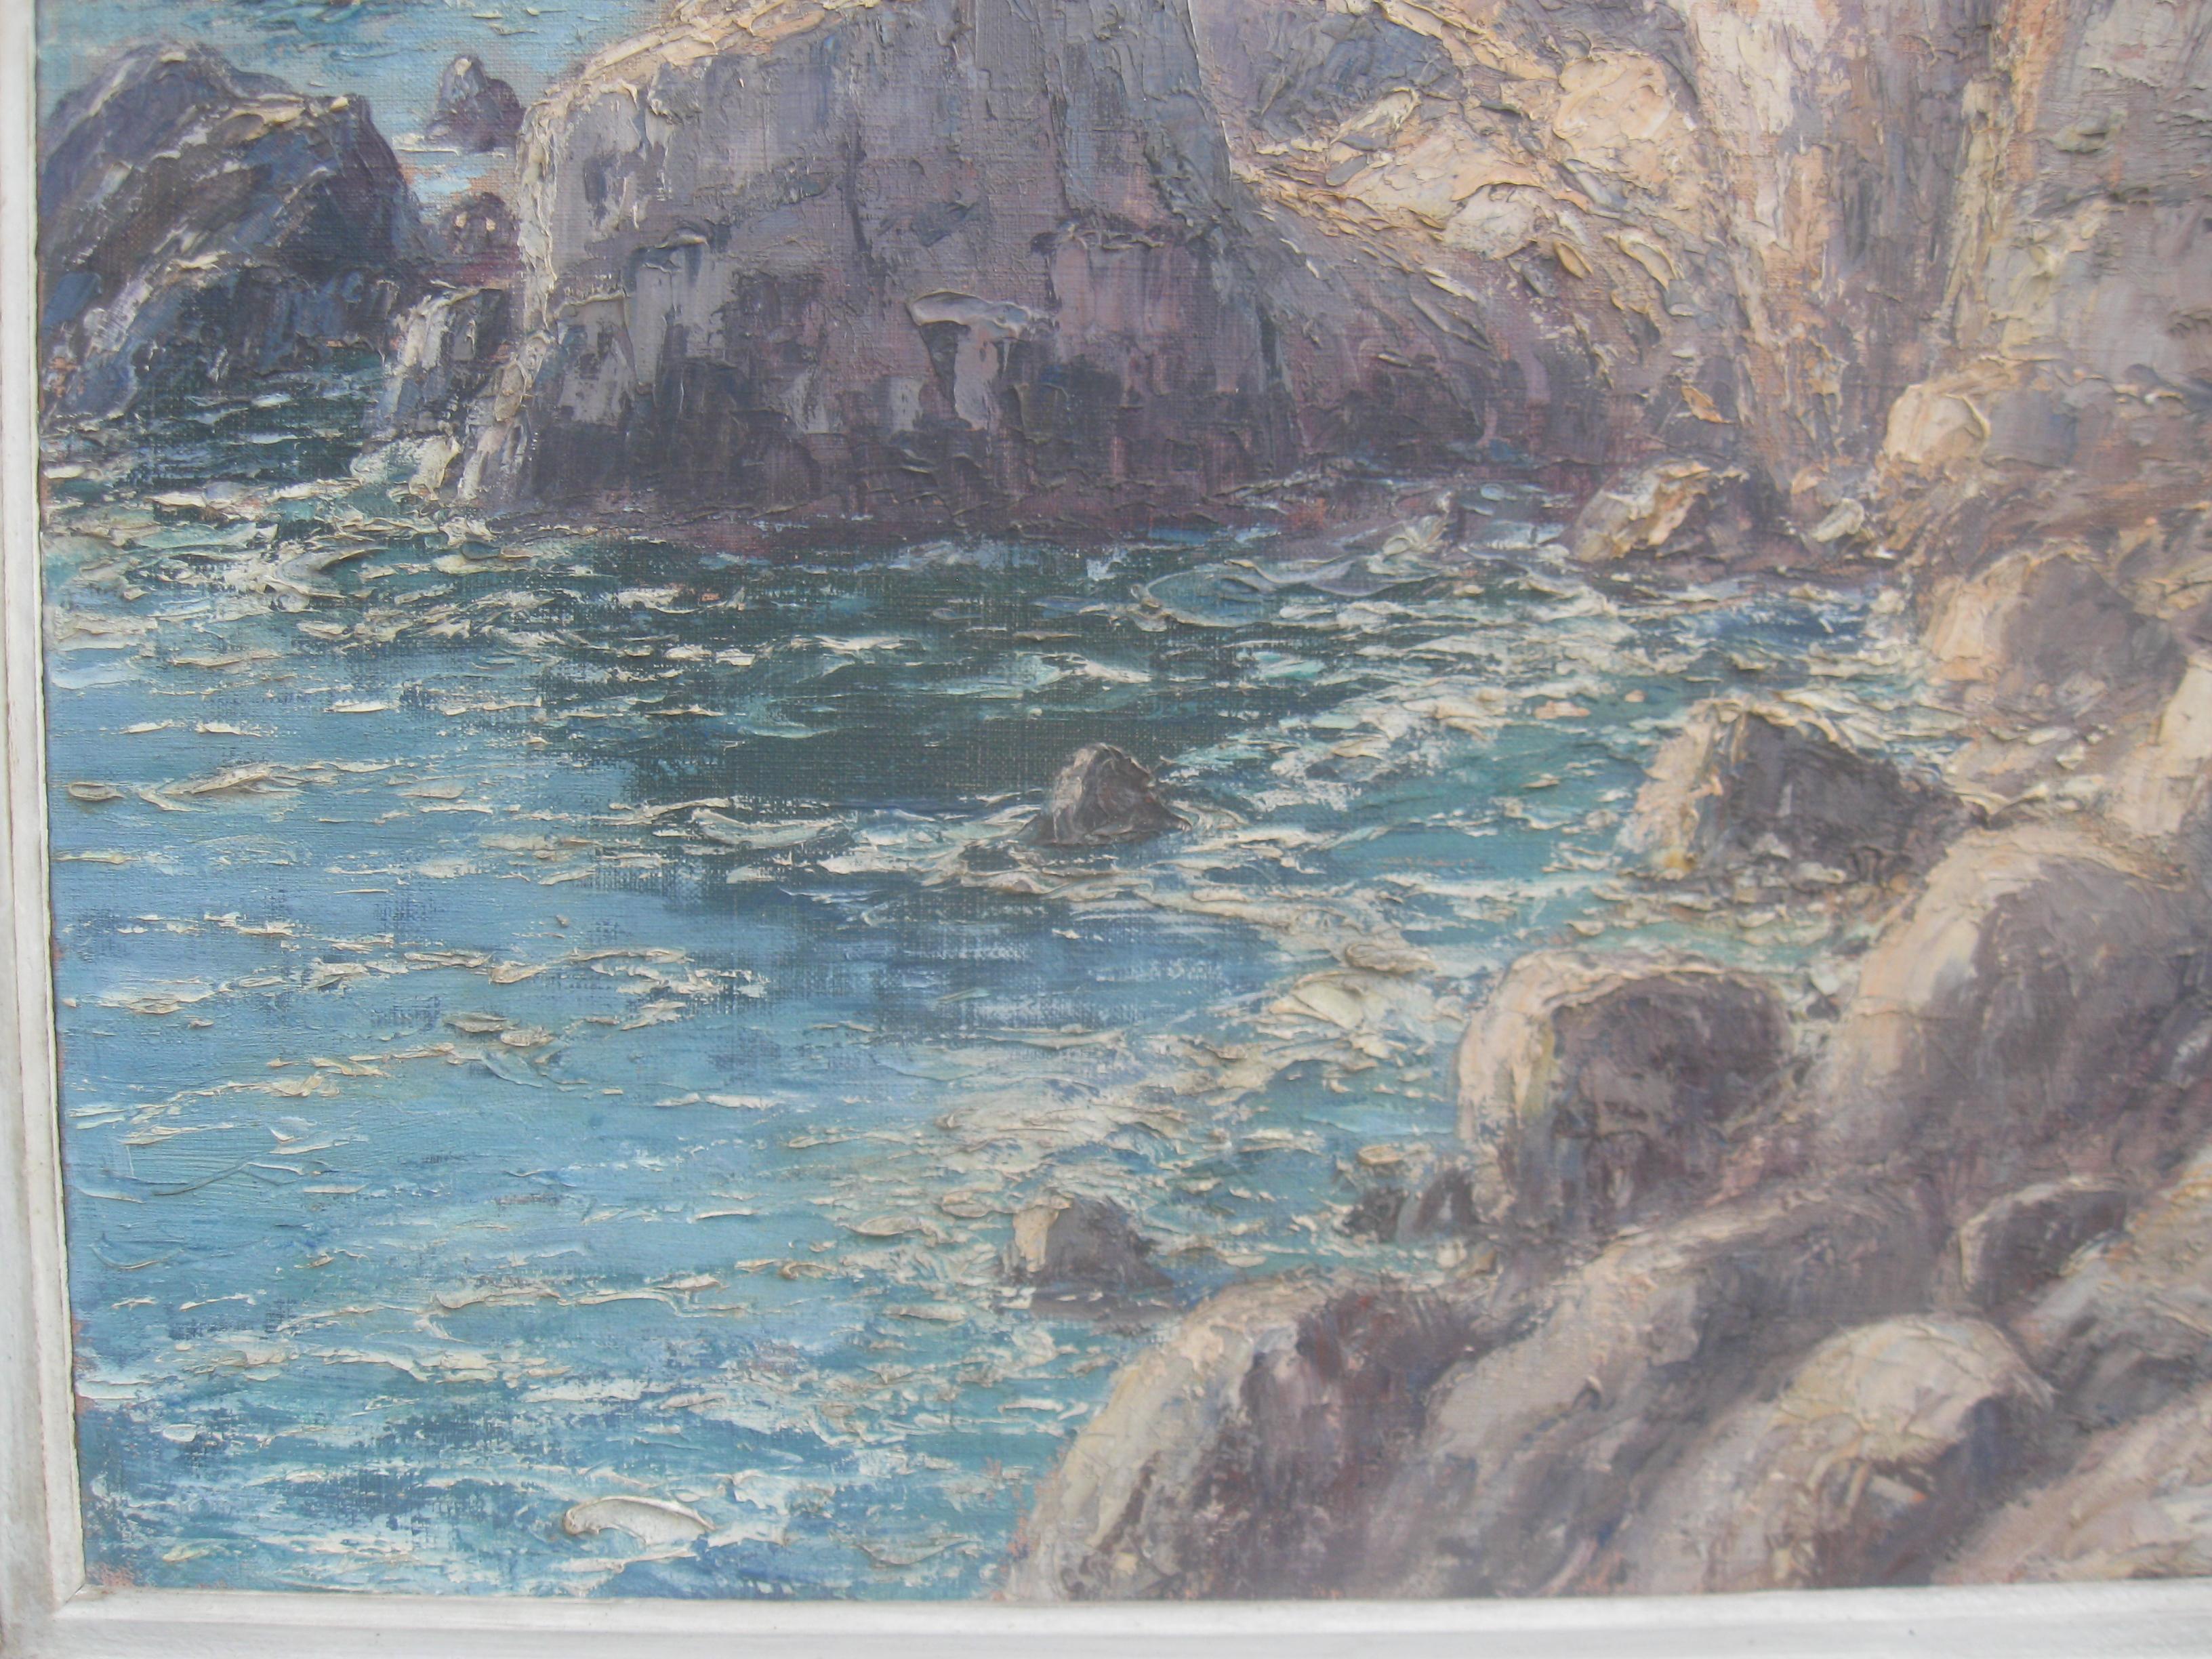 A fine large oil on canvas by the well listed French Impressionist Emile Gauffriaud. (1877-1957).  Fine Salon piece of Normandy/ Brittany chalk cliffs and headlands in summer. Superb impastoe Impressionist technique by the artist. Housed in the